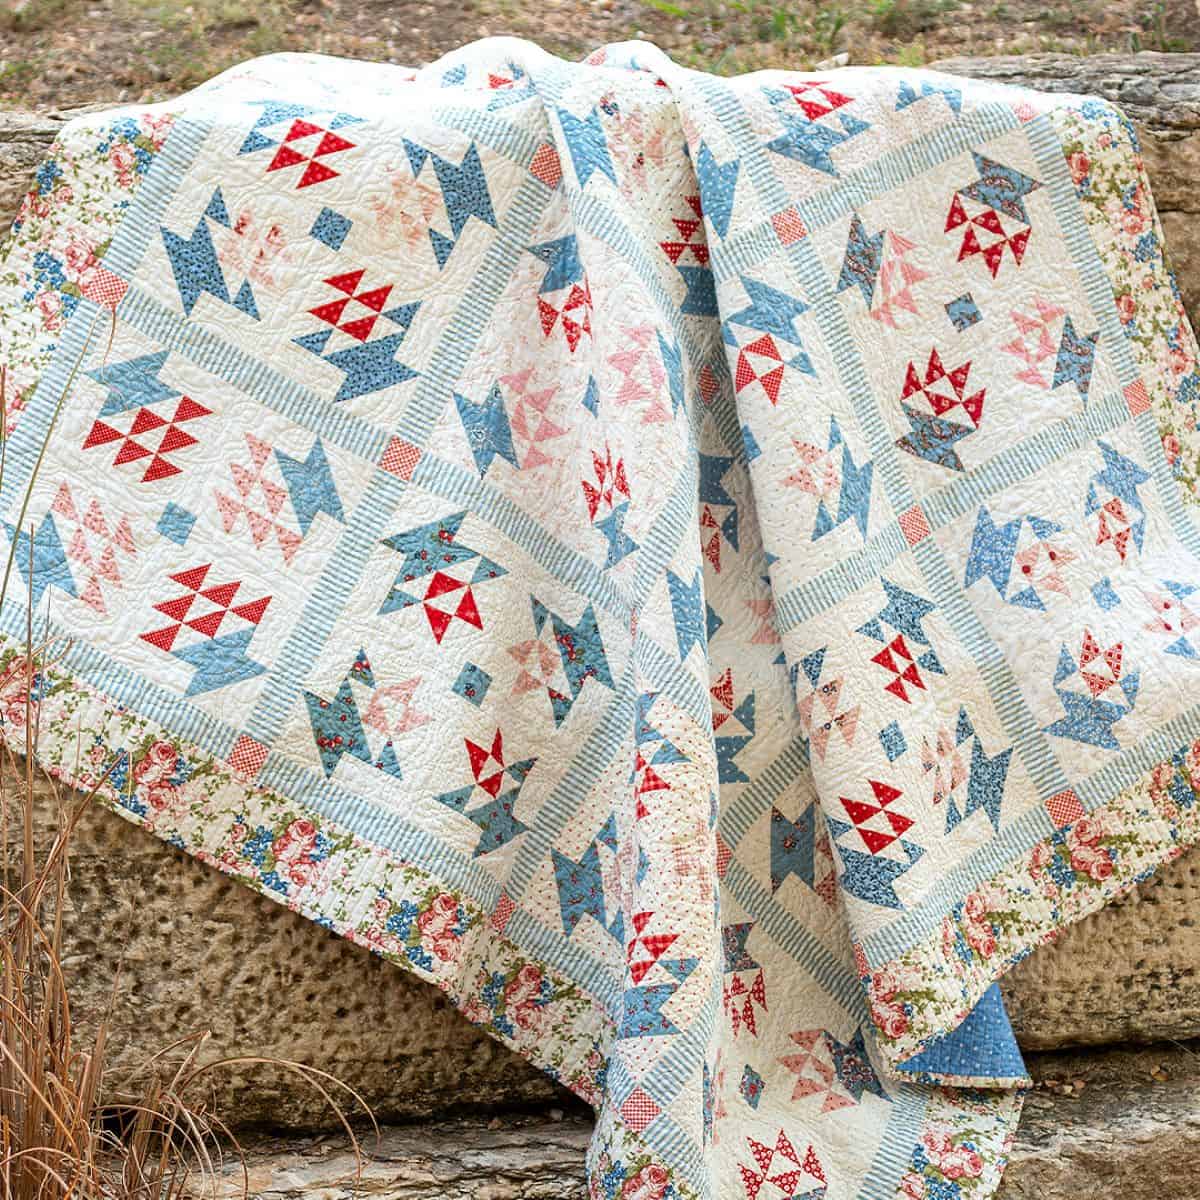 Summer Memories Trunk Show featured by Top US Quilt Blog, A Quilting Life